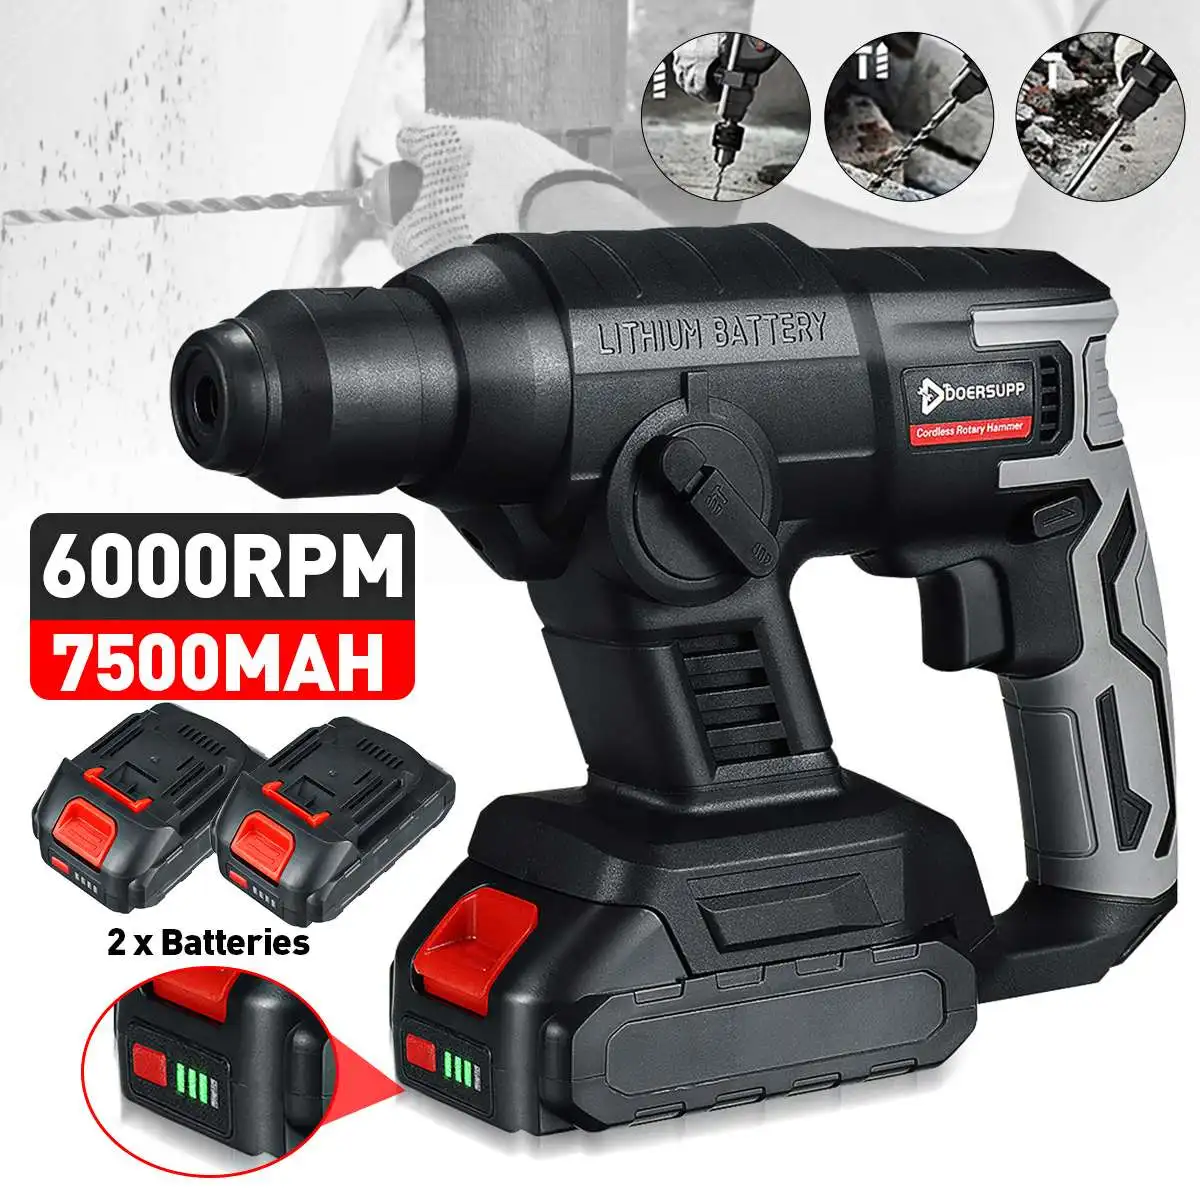 Cordless Rotary Hammer +1/2 Battery Rechargeable Mini Hammer Impact Drill Multifunction Power Tool Adapted to Makita Battery